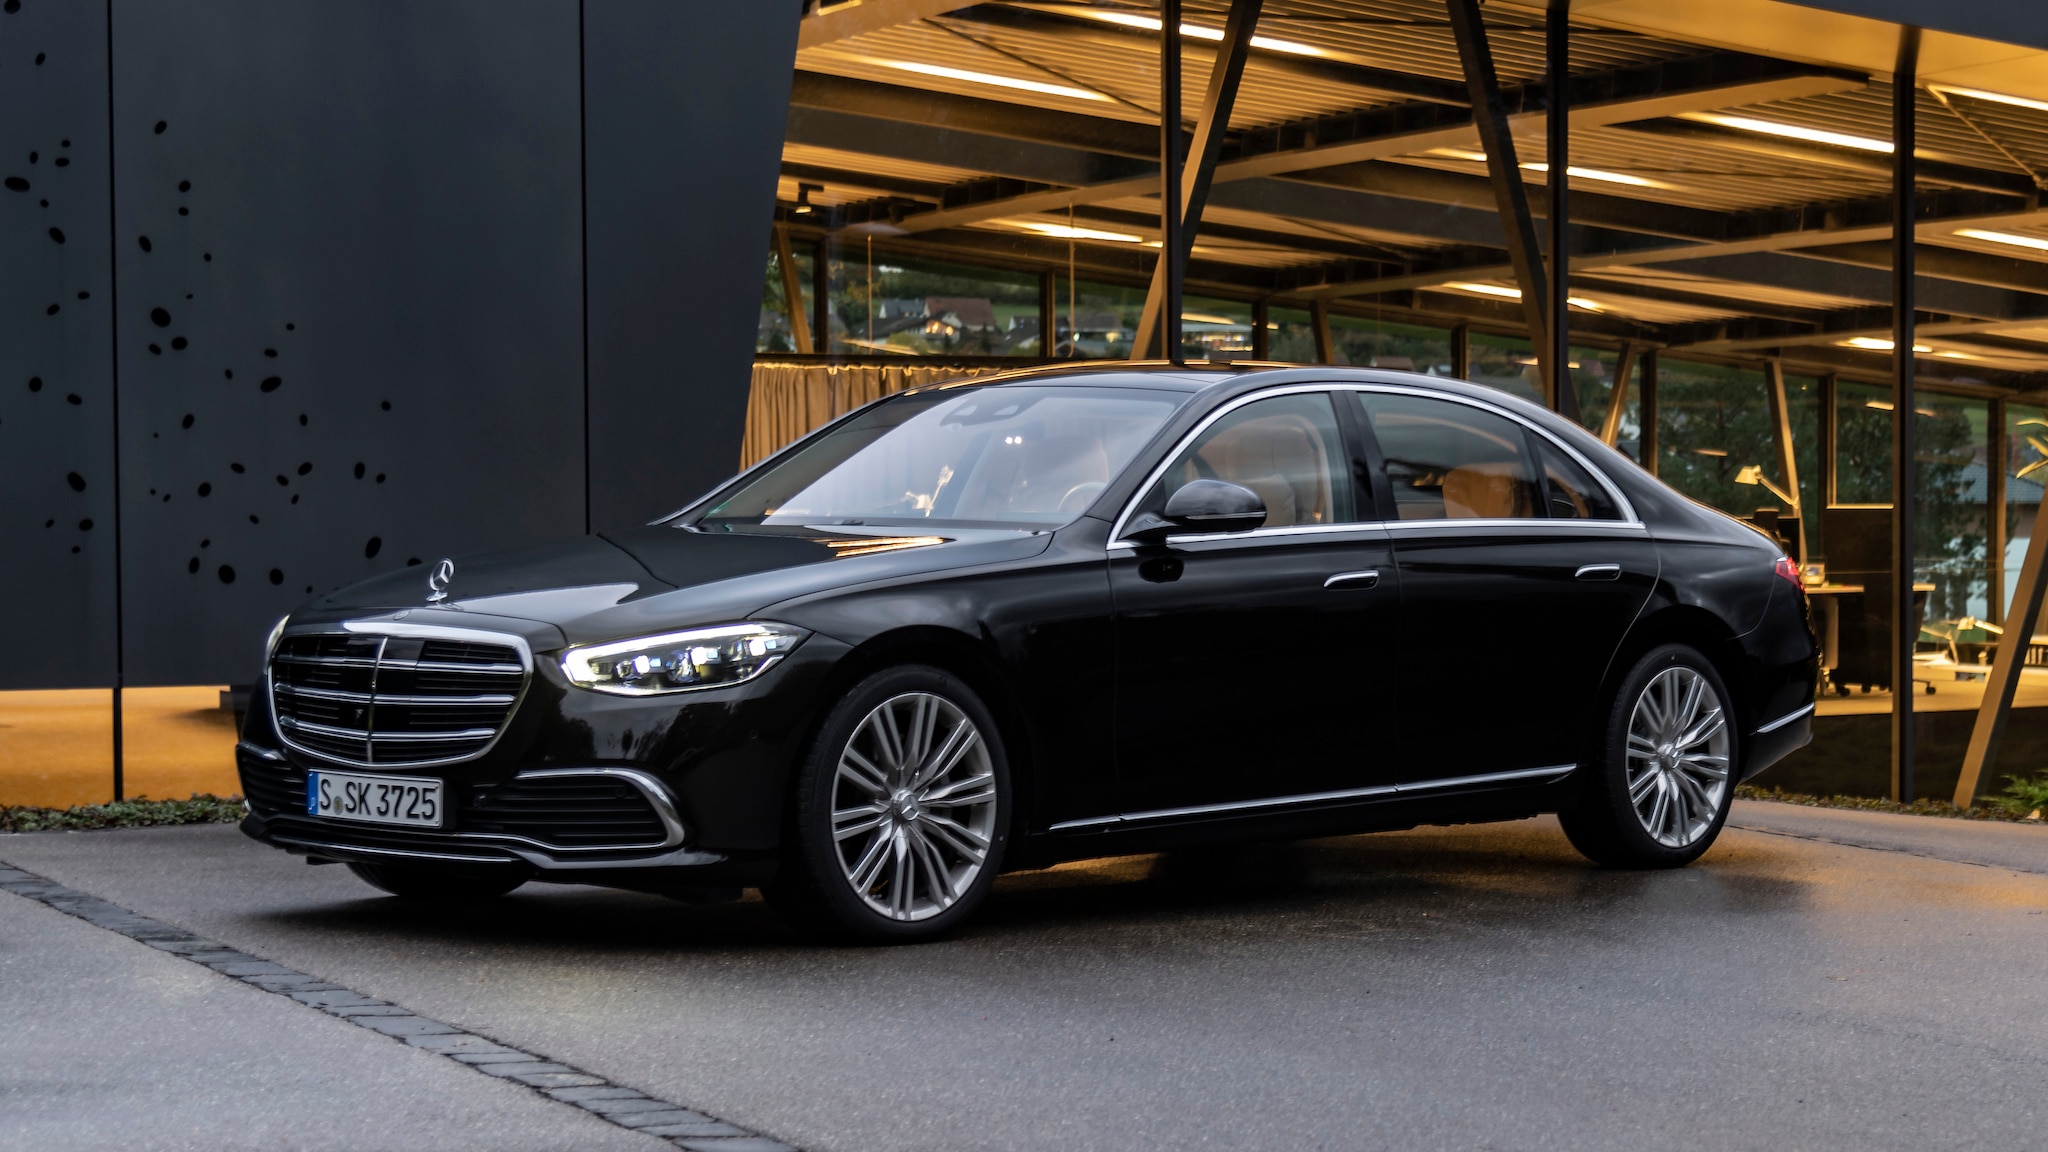 New 2021 Mercedes S Class's New Price Tag Nearly $000 Higher